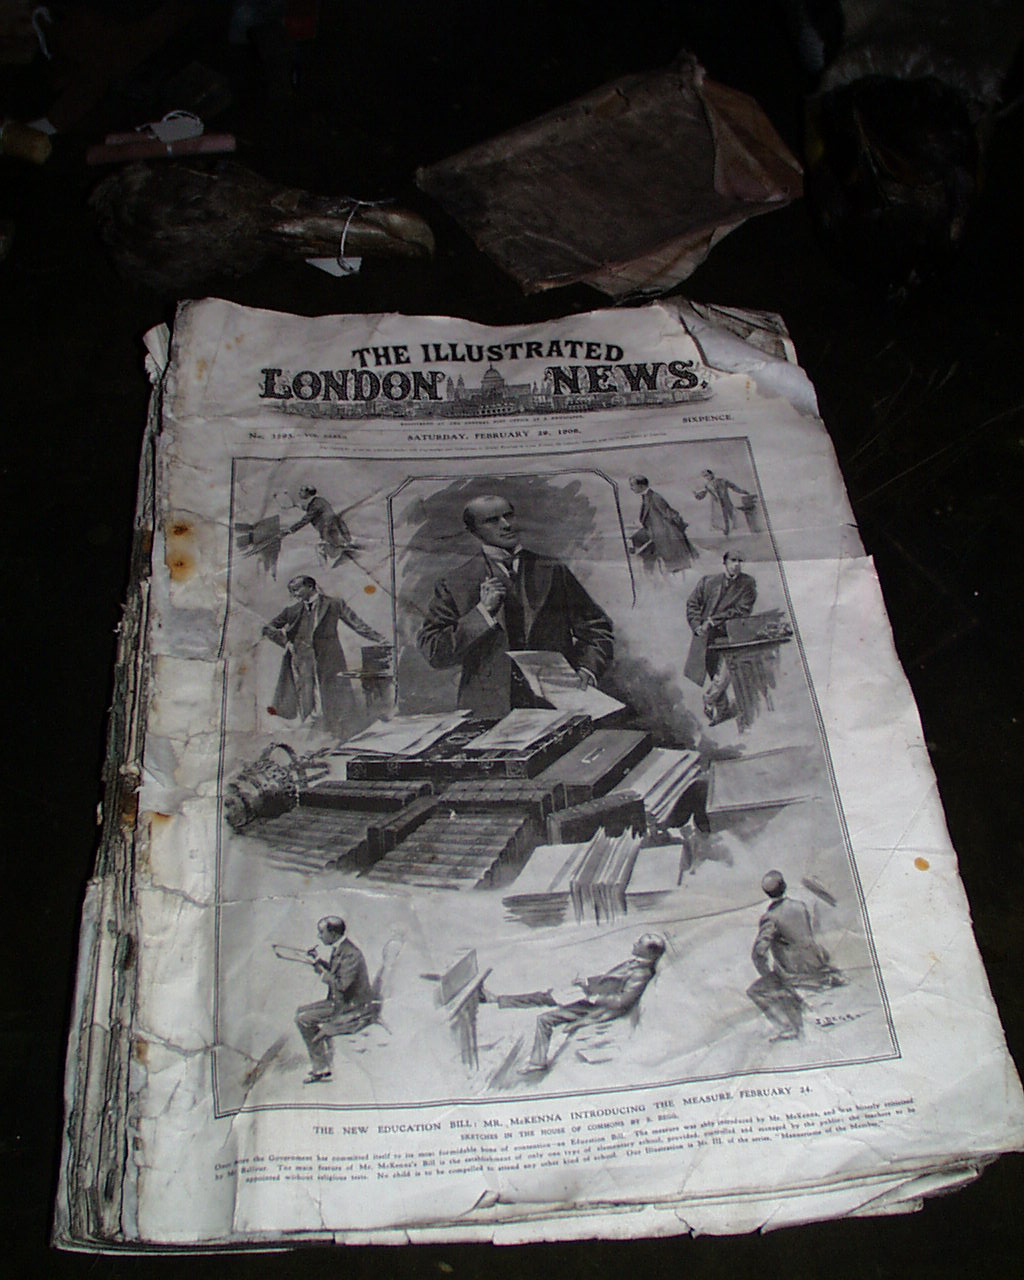 An old newspaper lies on a table.